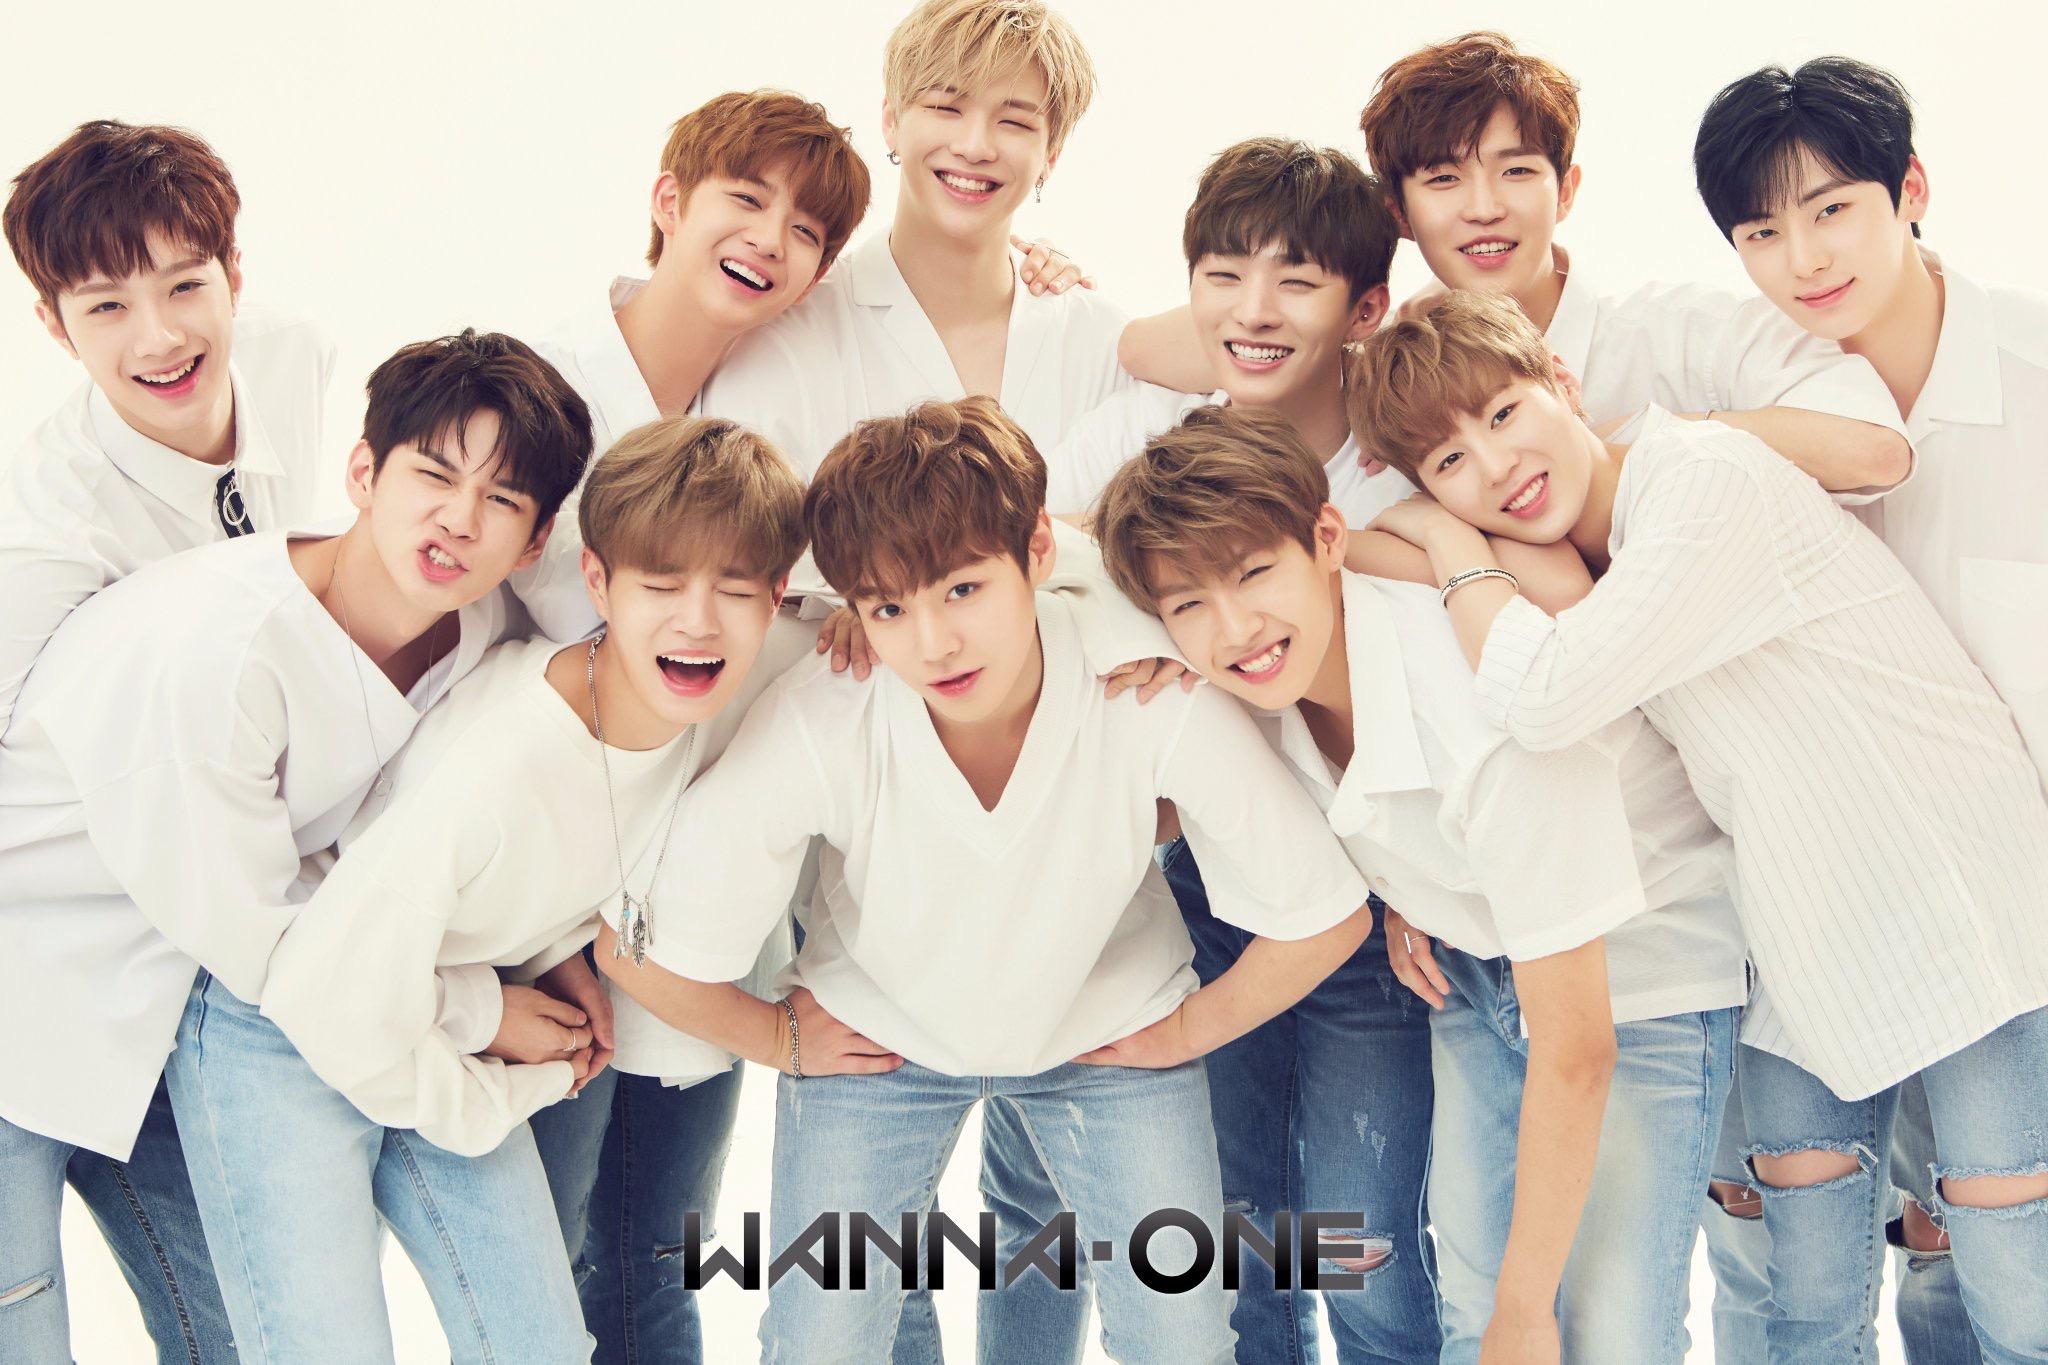 Wanna One image Wanna One HD wallpaper and background photo